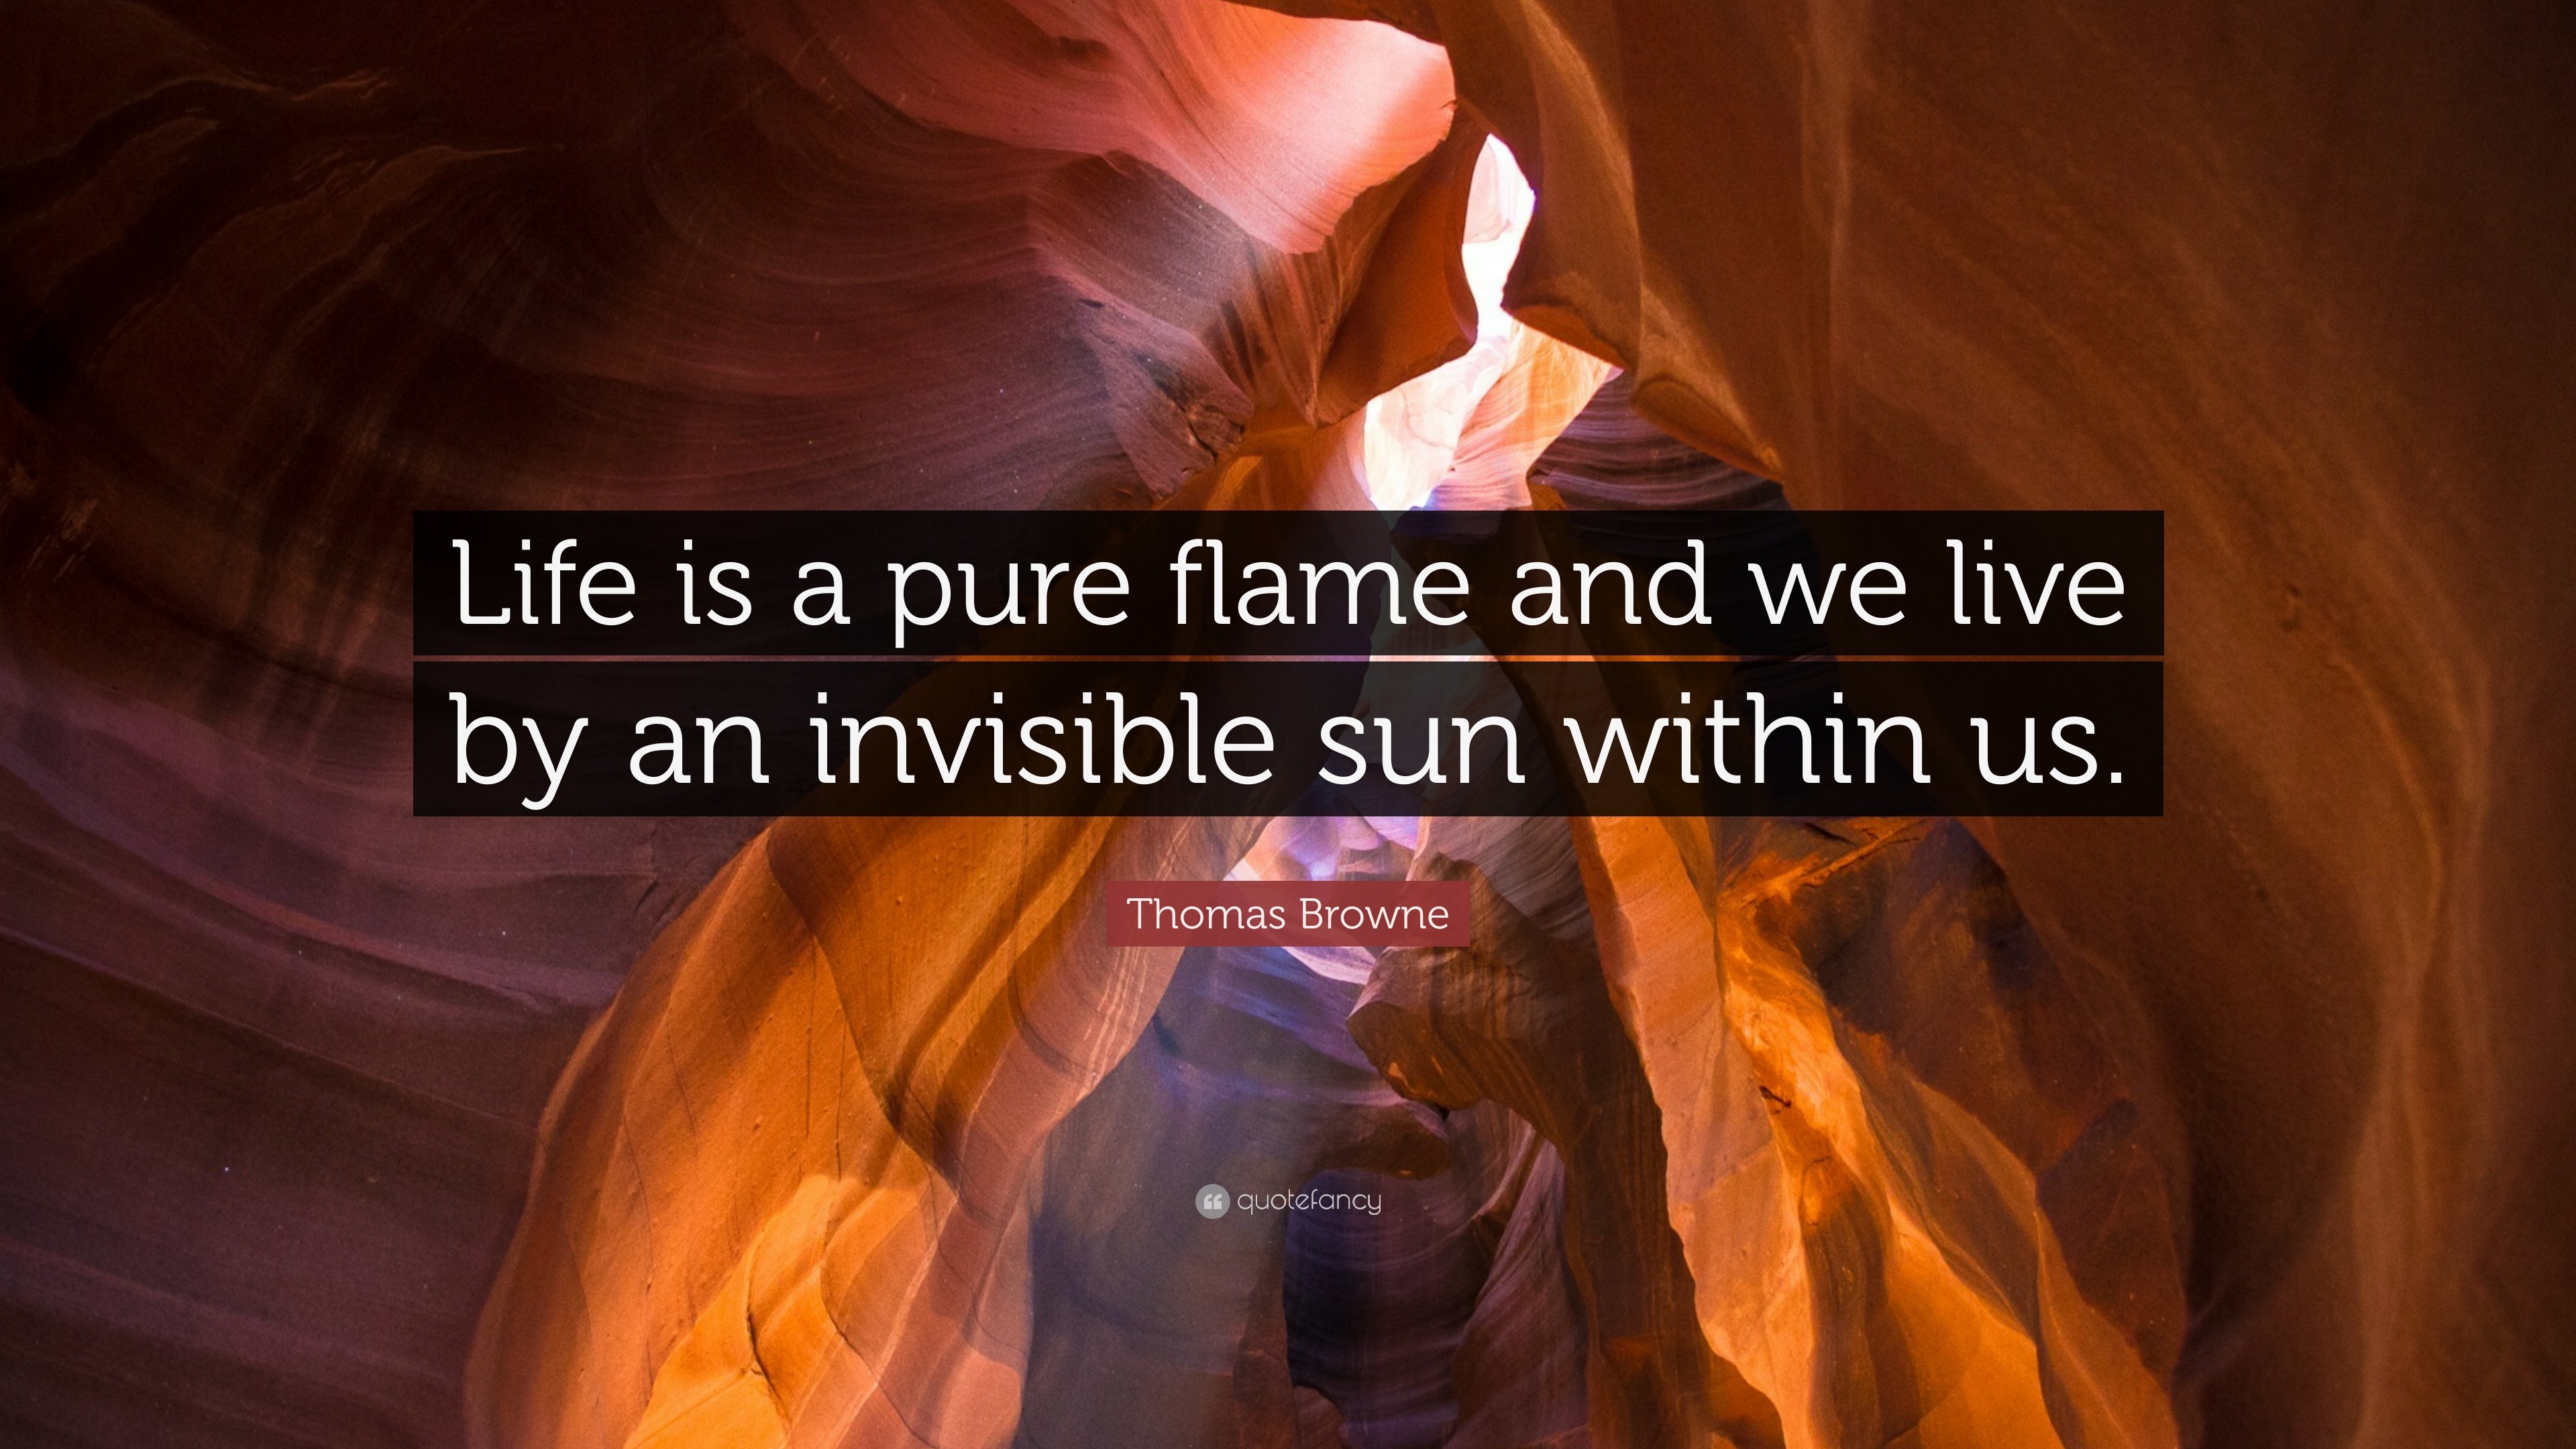 3840x2160 Thomas Browne Quote: “Life is a pure flame and we live by an invisible